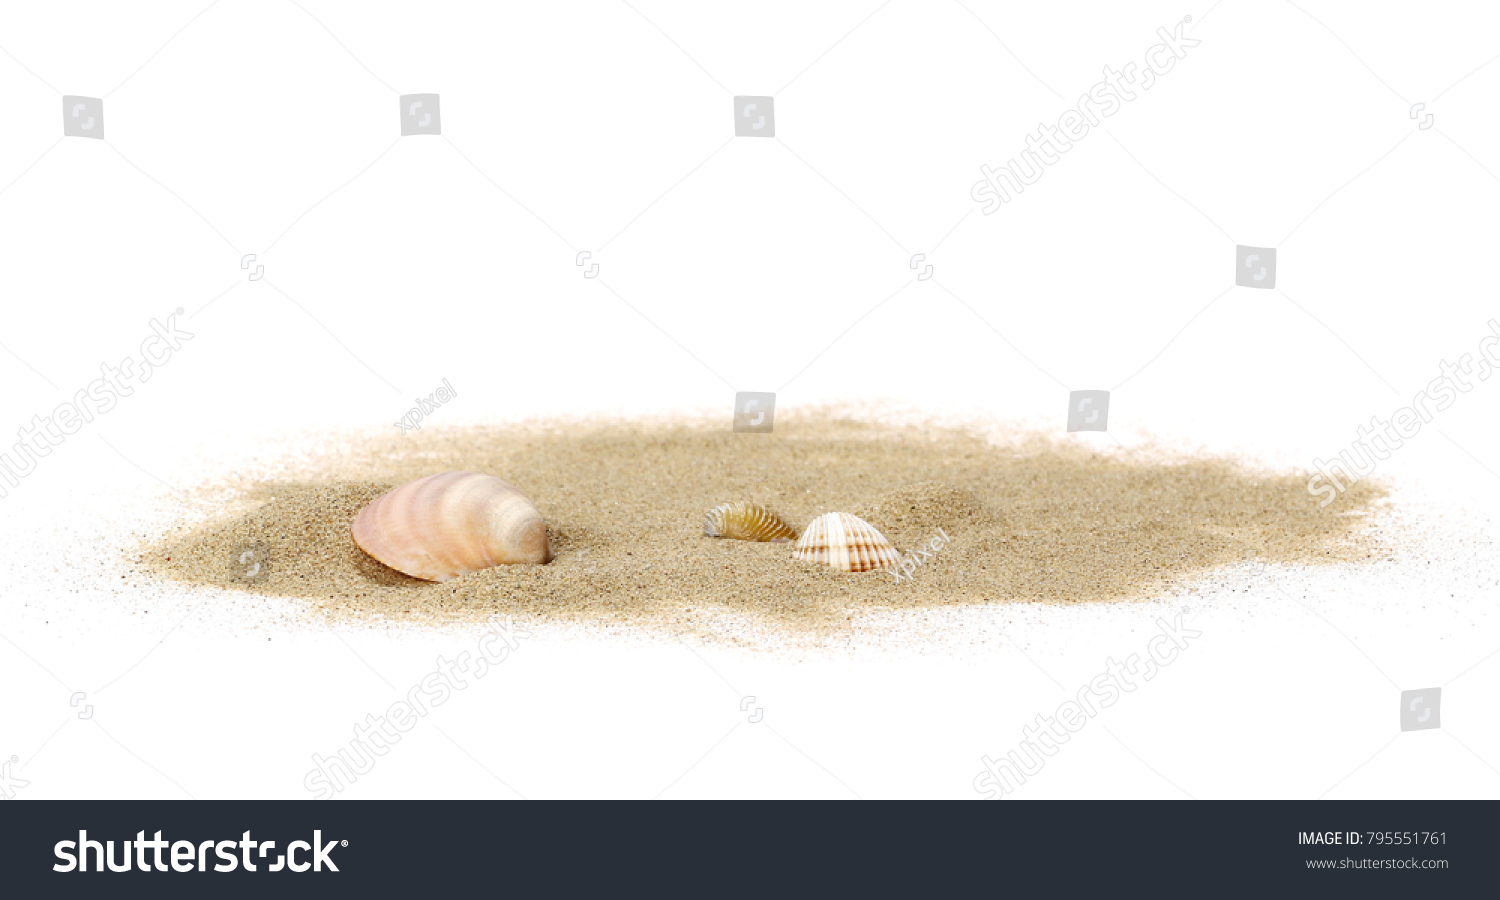 Sea shells in sand pile isolated on white background #795551761